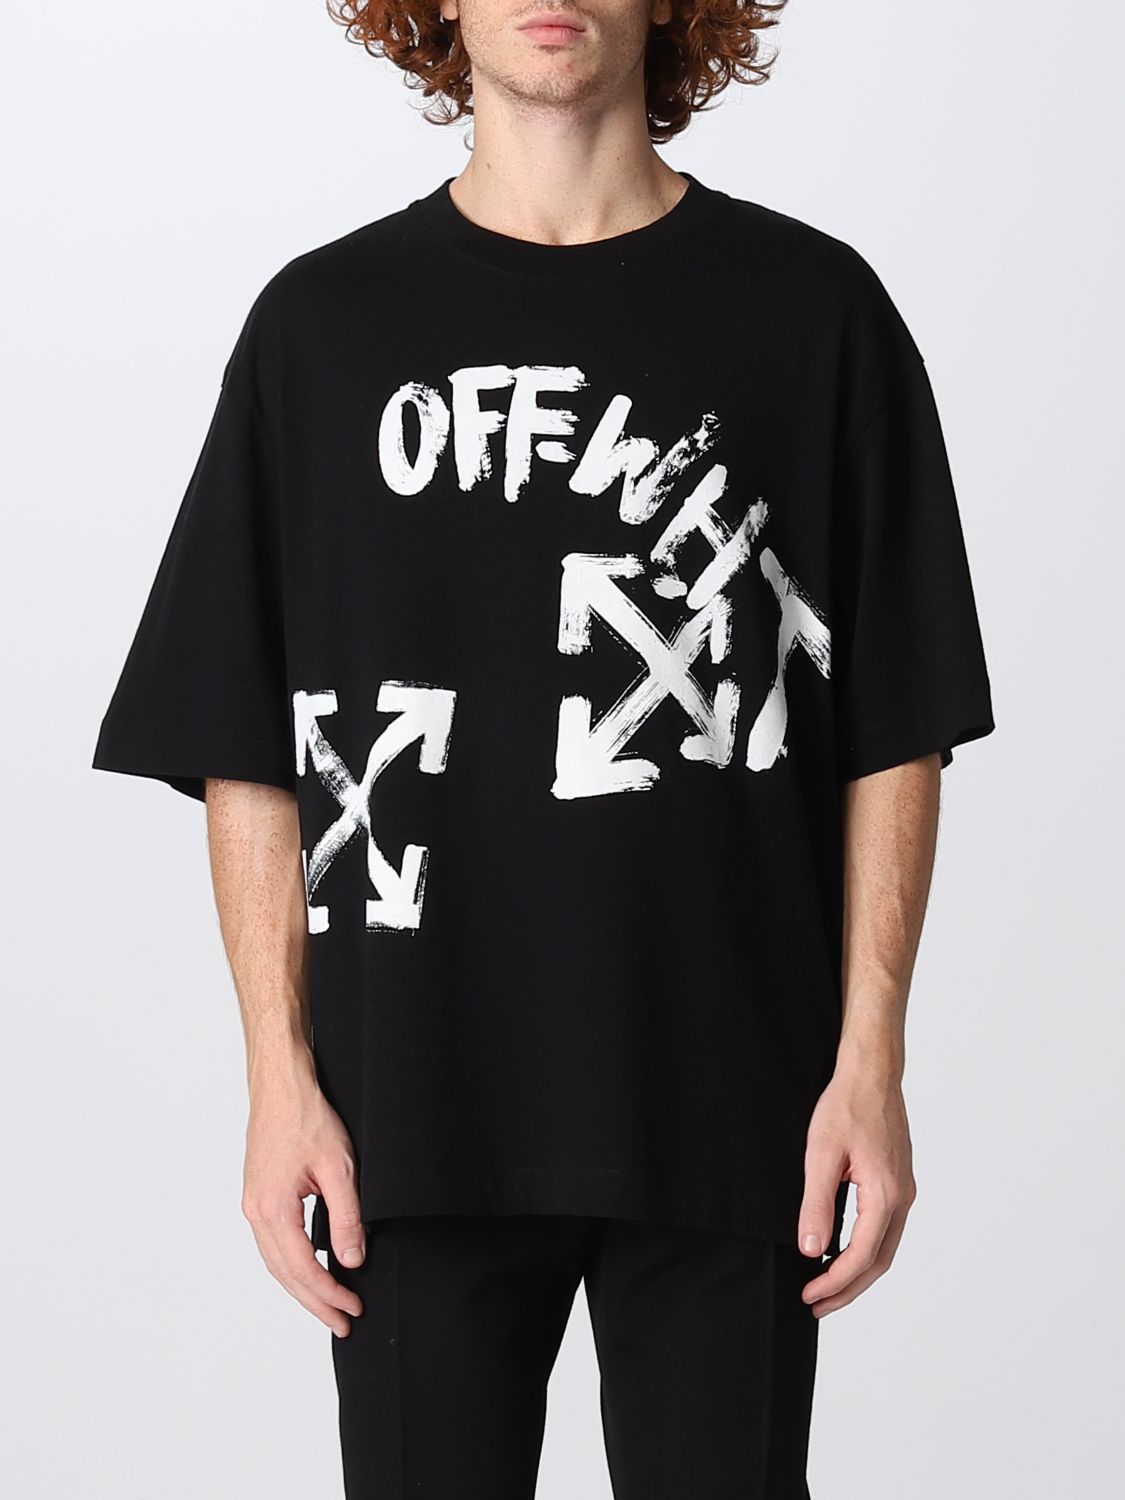 Off-White T-shirts for Men - Vestiaire Collective